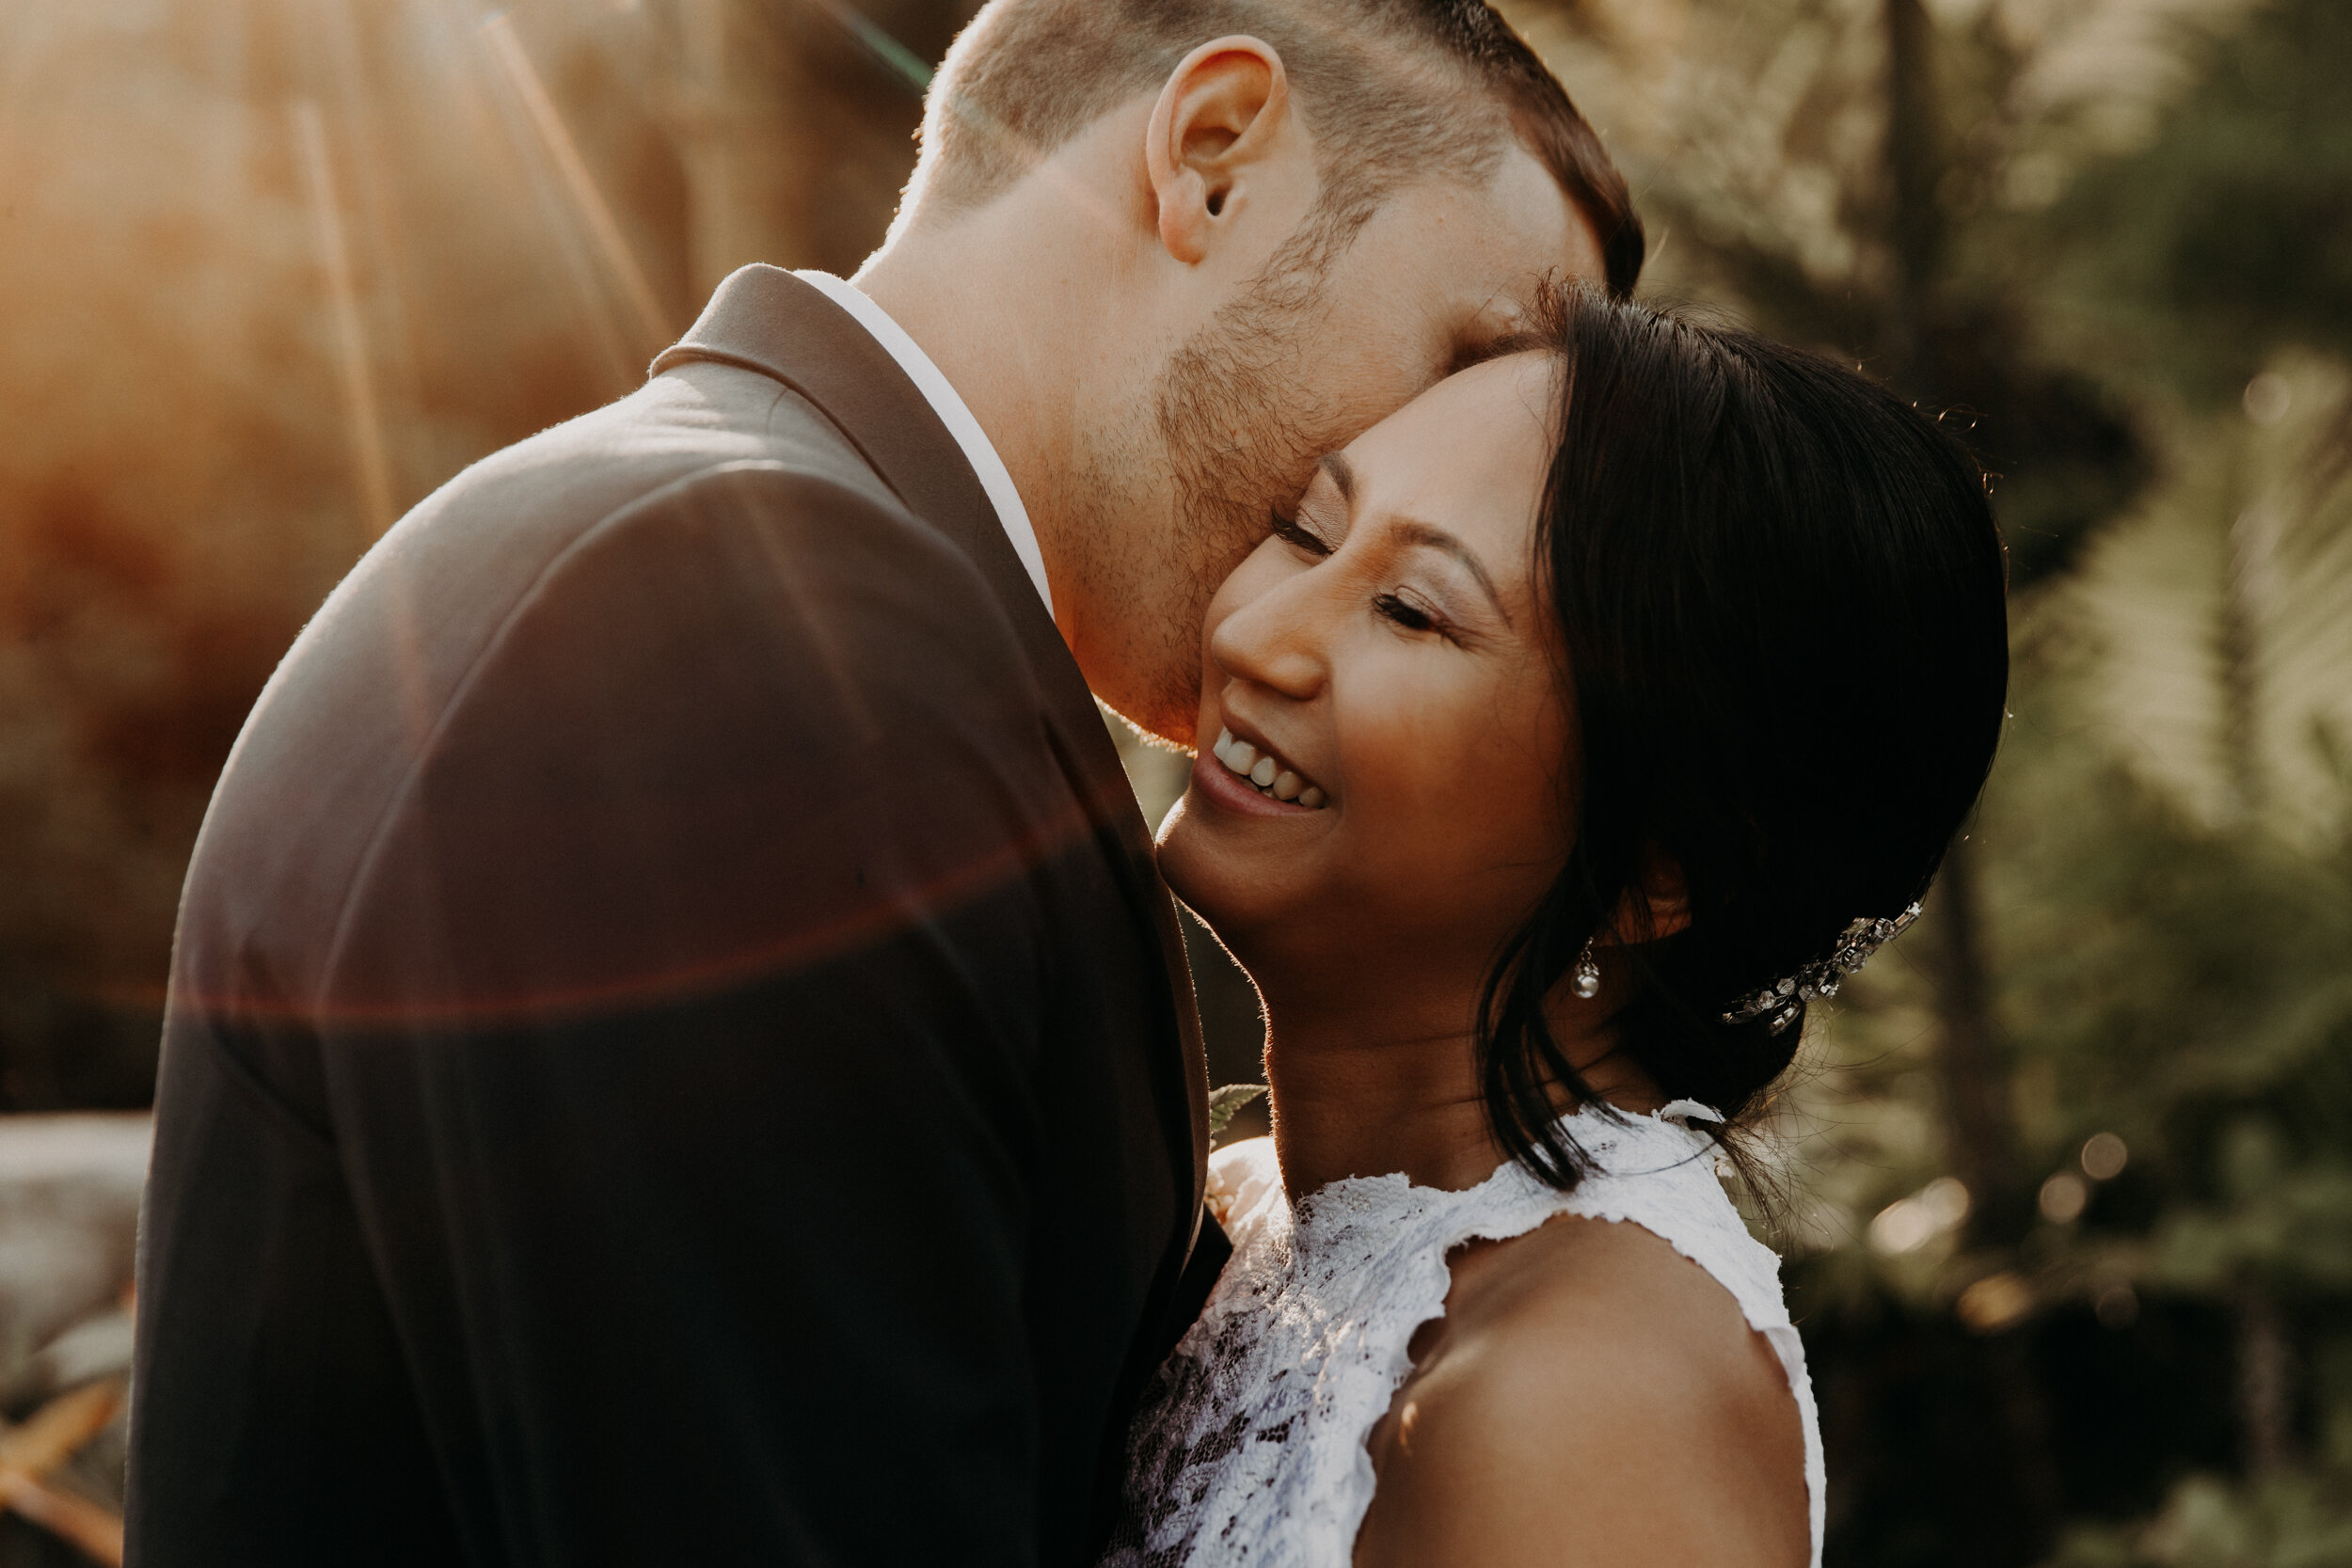 couple enjoying their wedding day while staying relaxed, smiling, and embracing one another